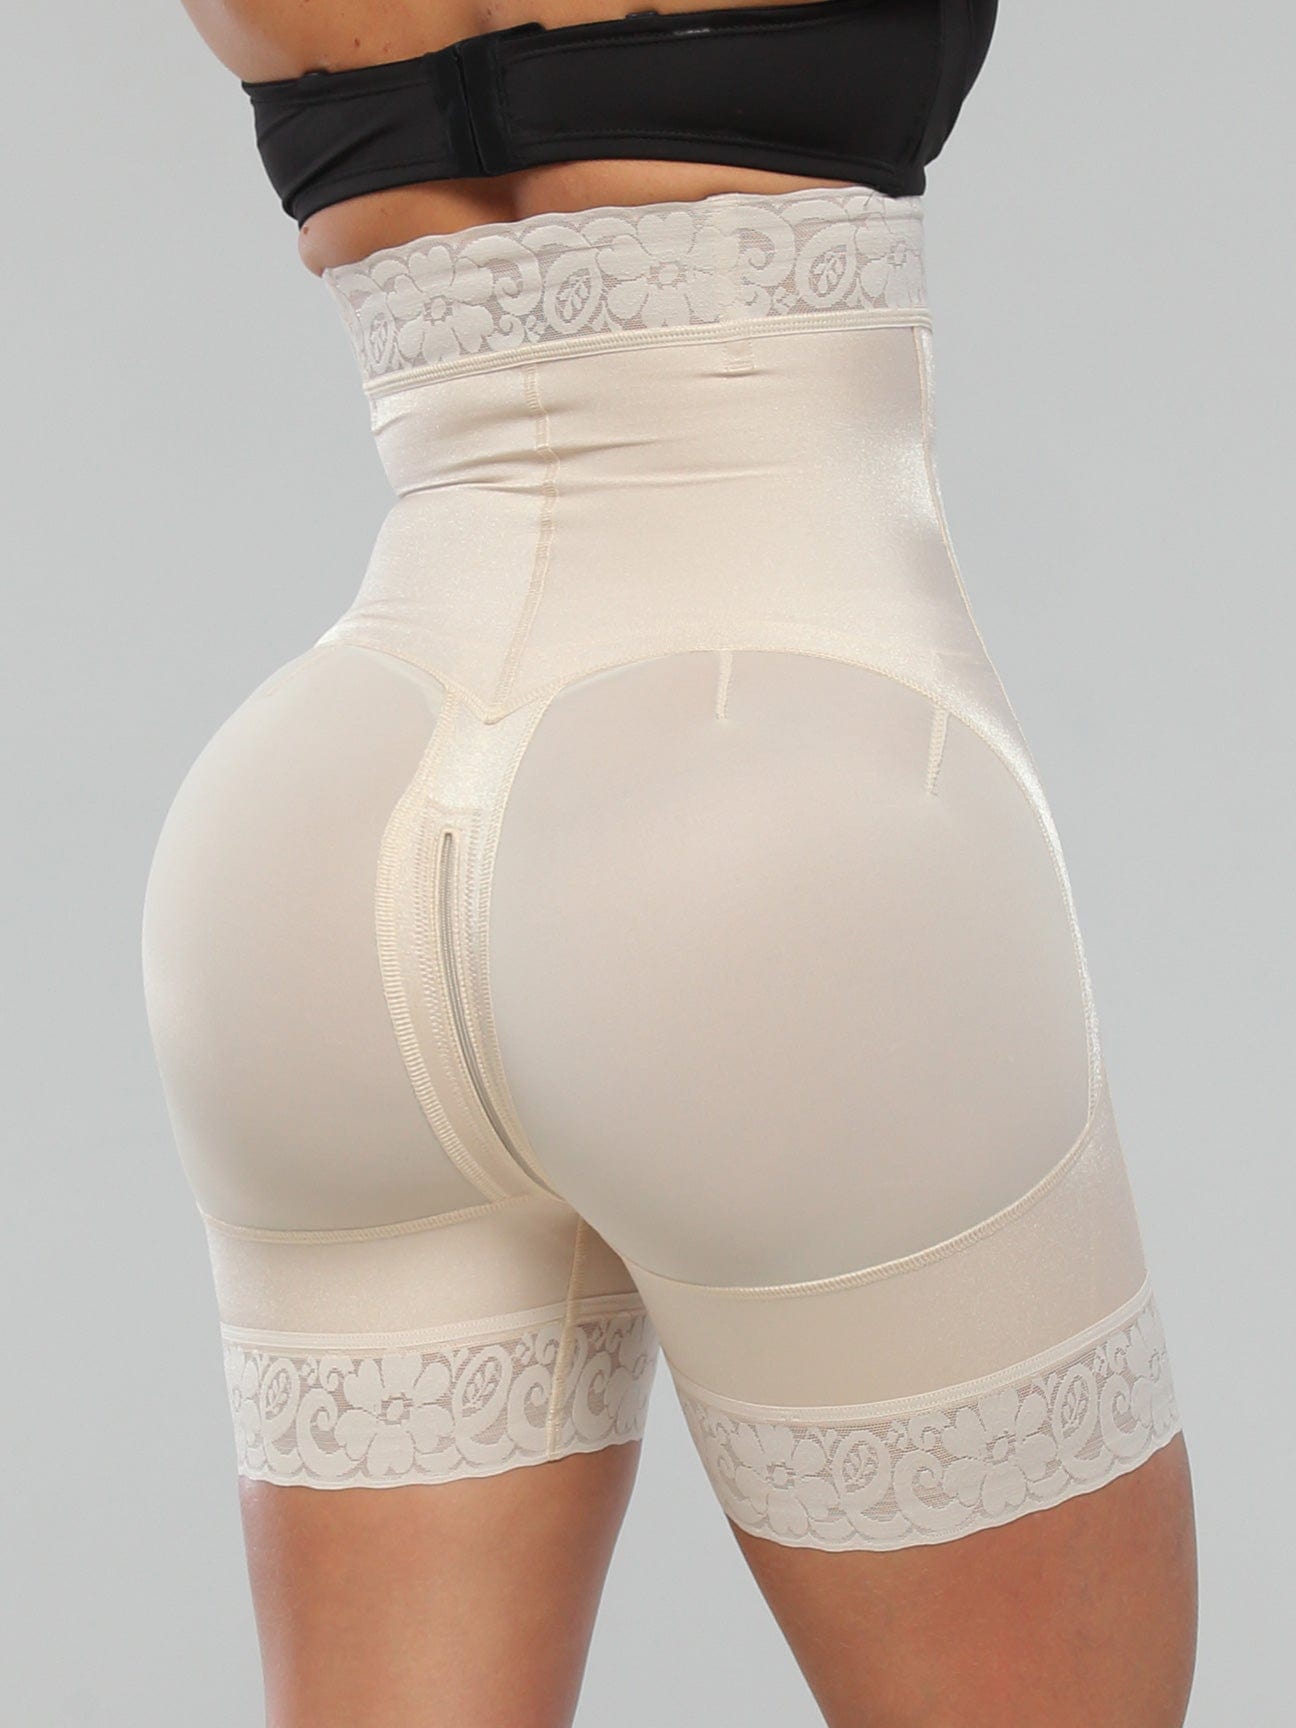 Invisible Short and Waist Shaper